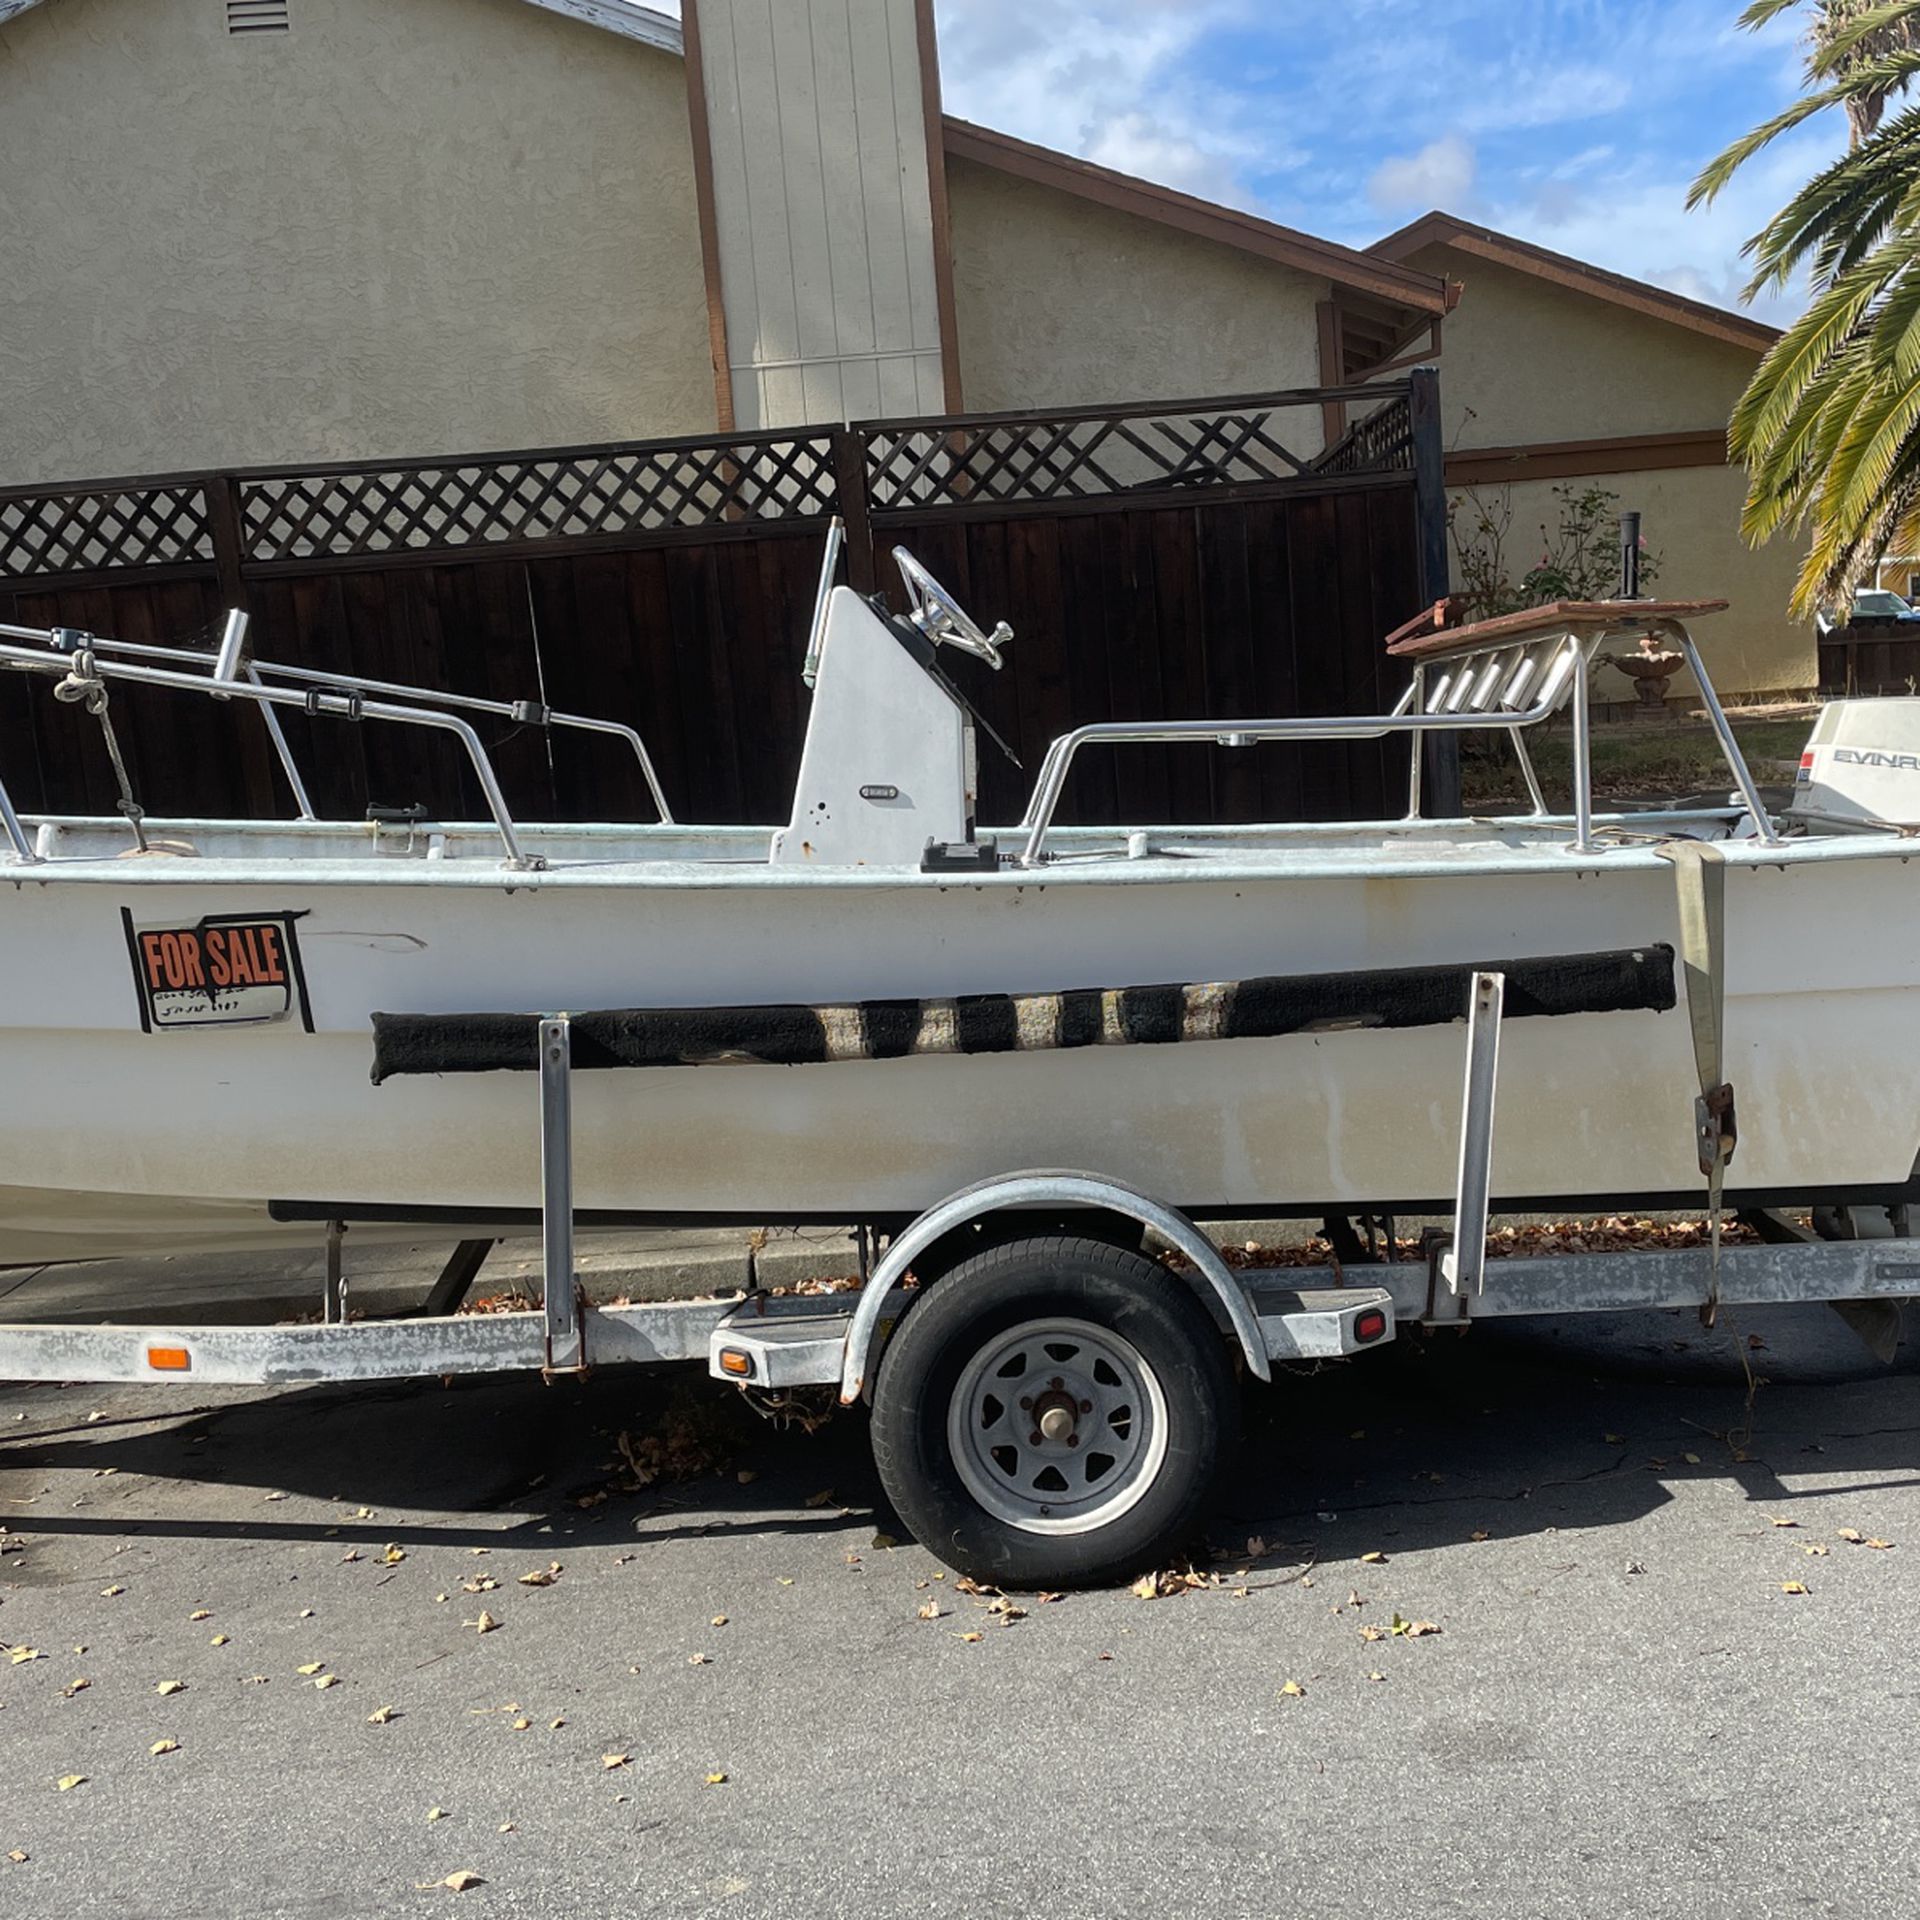 3 Boats for sale the Chris-Craft both need upholstery Redone